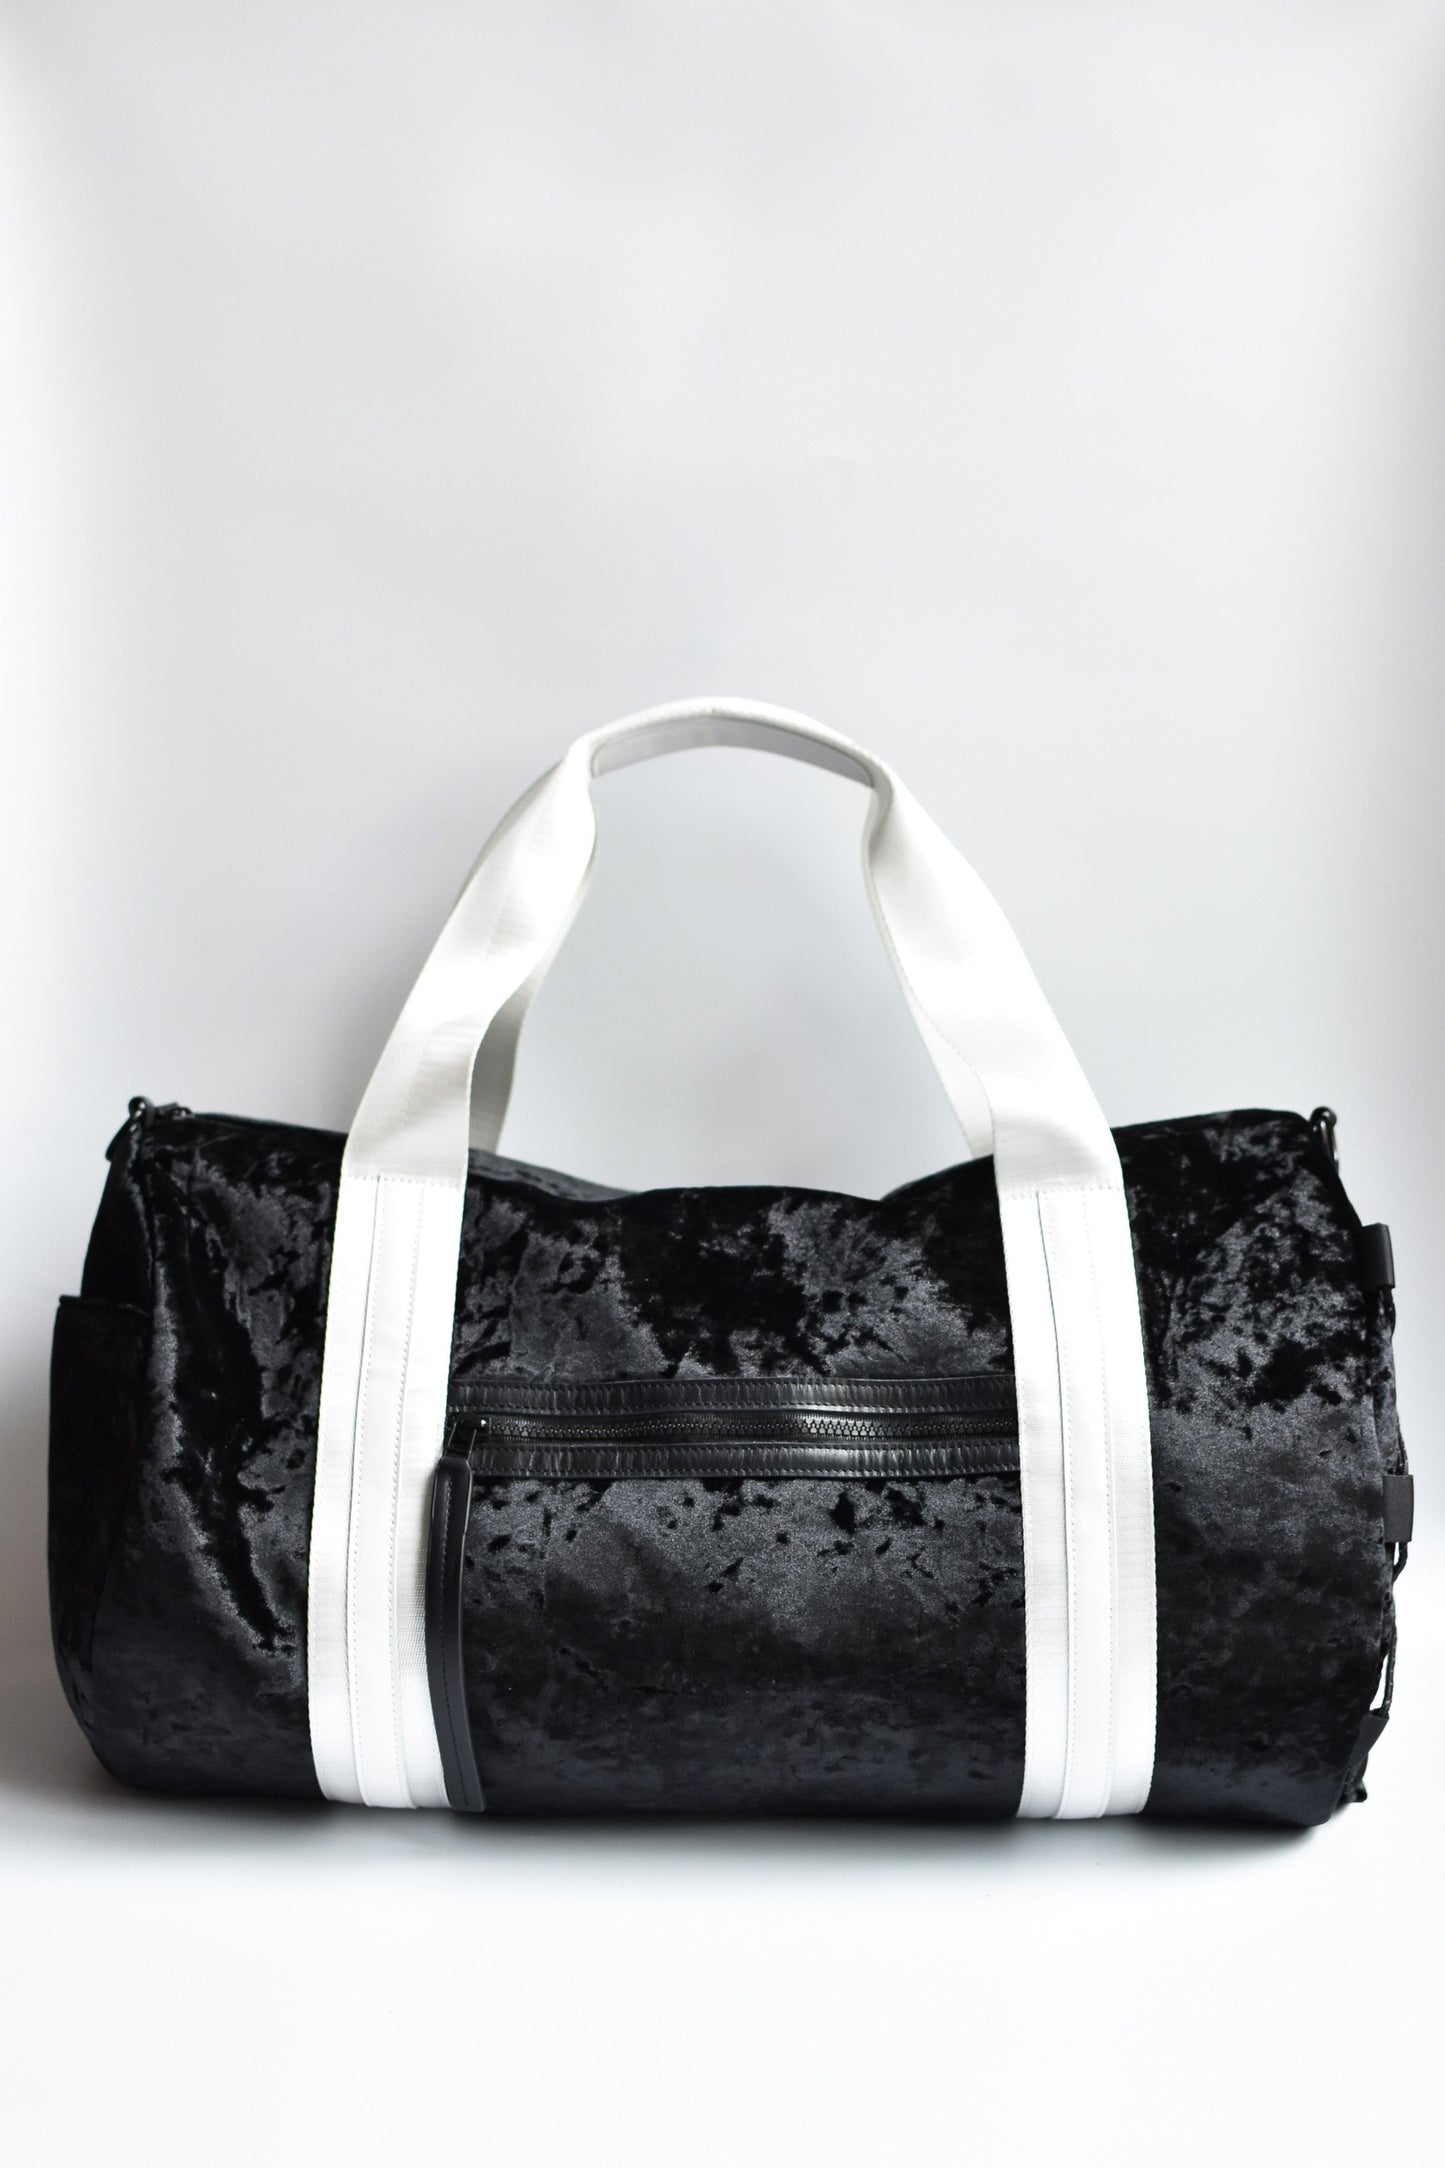 Black velour duffel bag with white straps and leather details. 